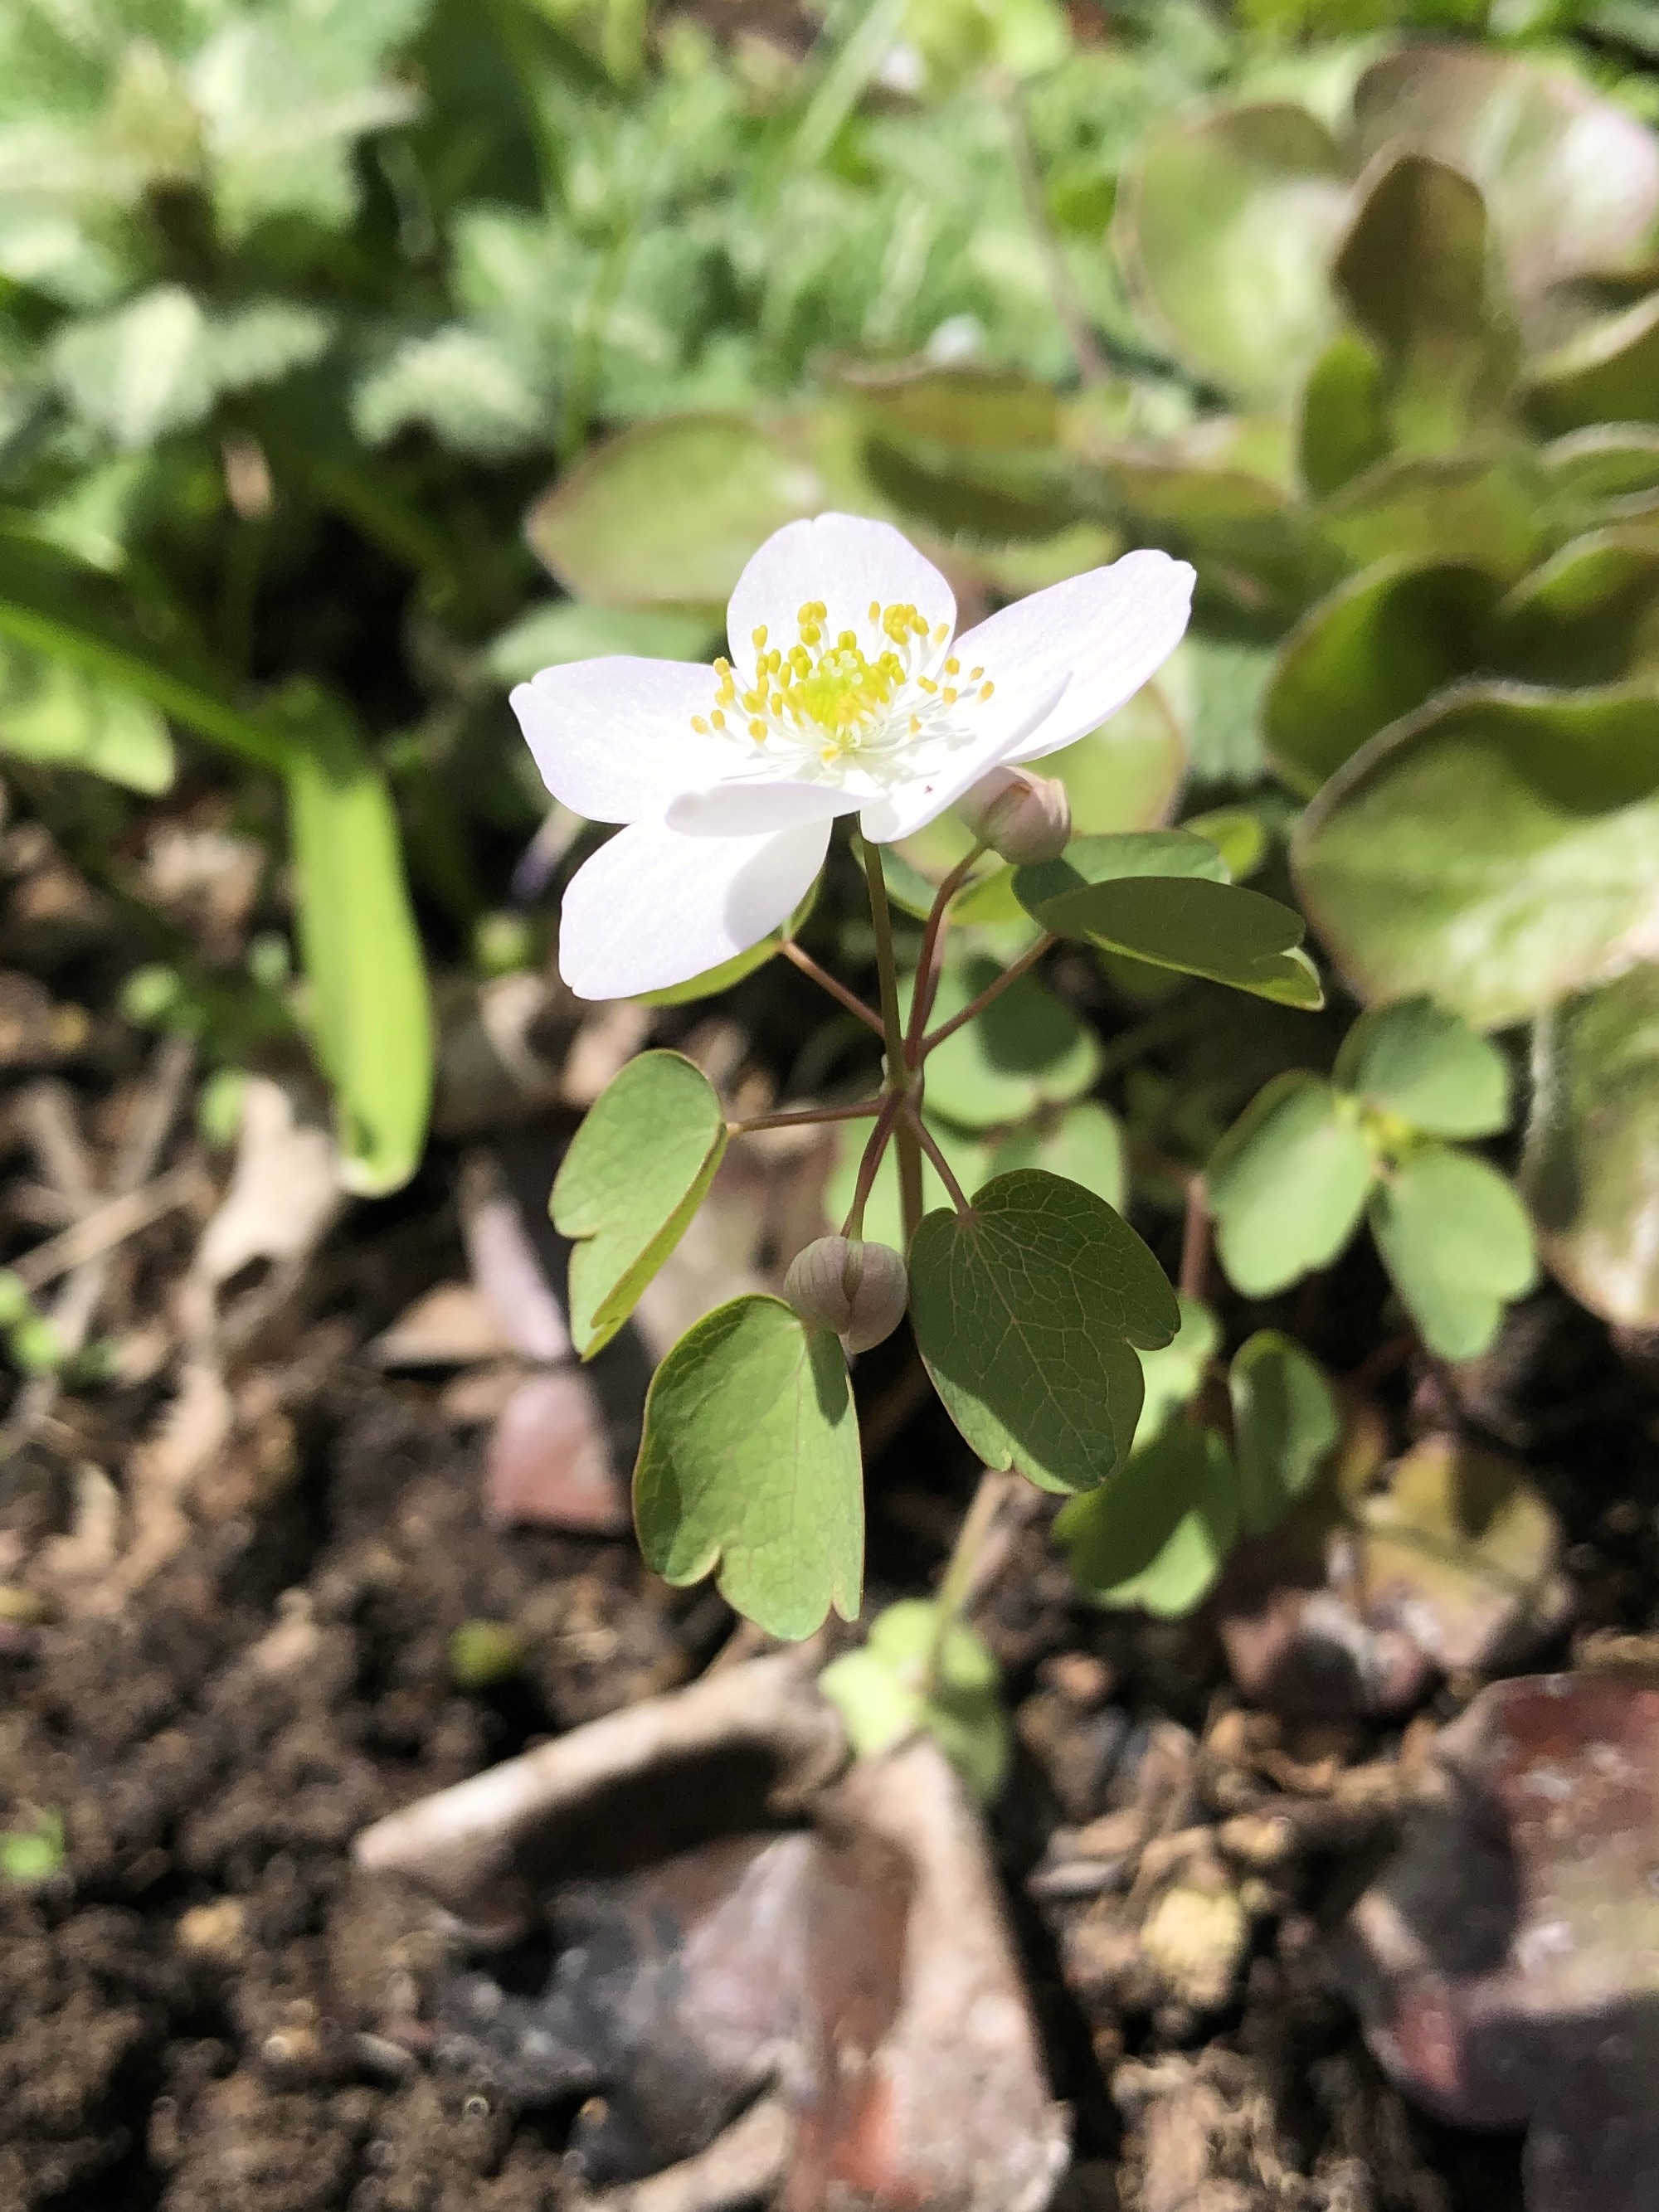 Rue-anemone near Agawa Path (growing through Hepatica leaves) in Madison, Wisconsin on May 5, 2022.